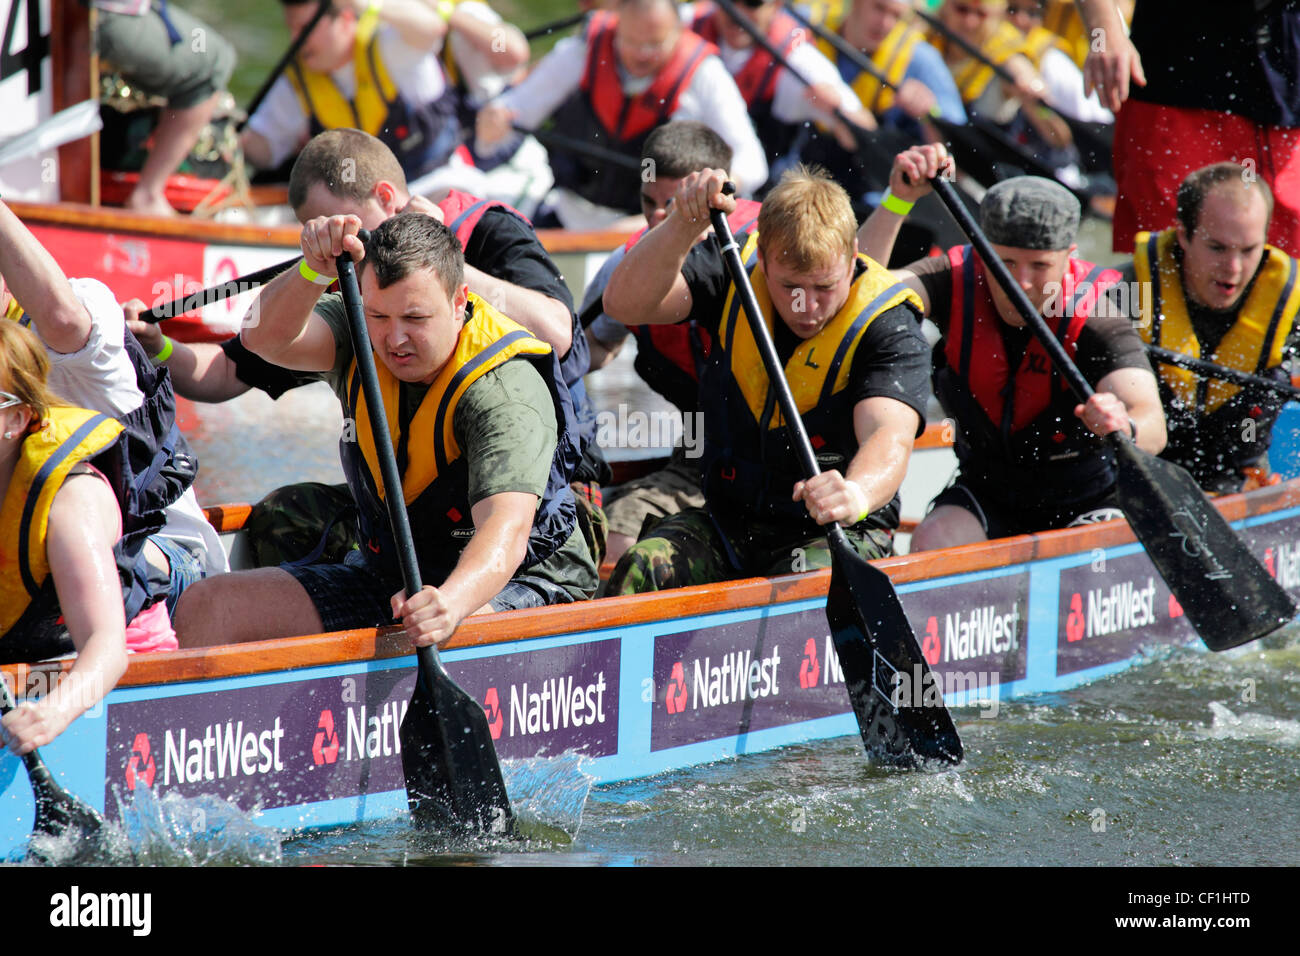 Dragon boat racing at the annual fund raising event on the River Thames at Abingdon 4. Stock Photo